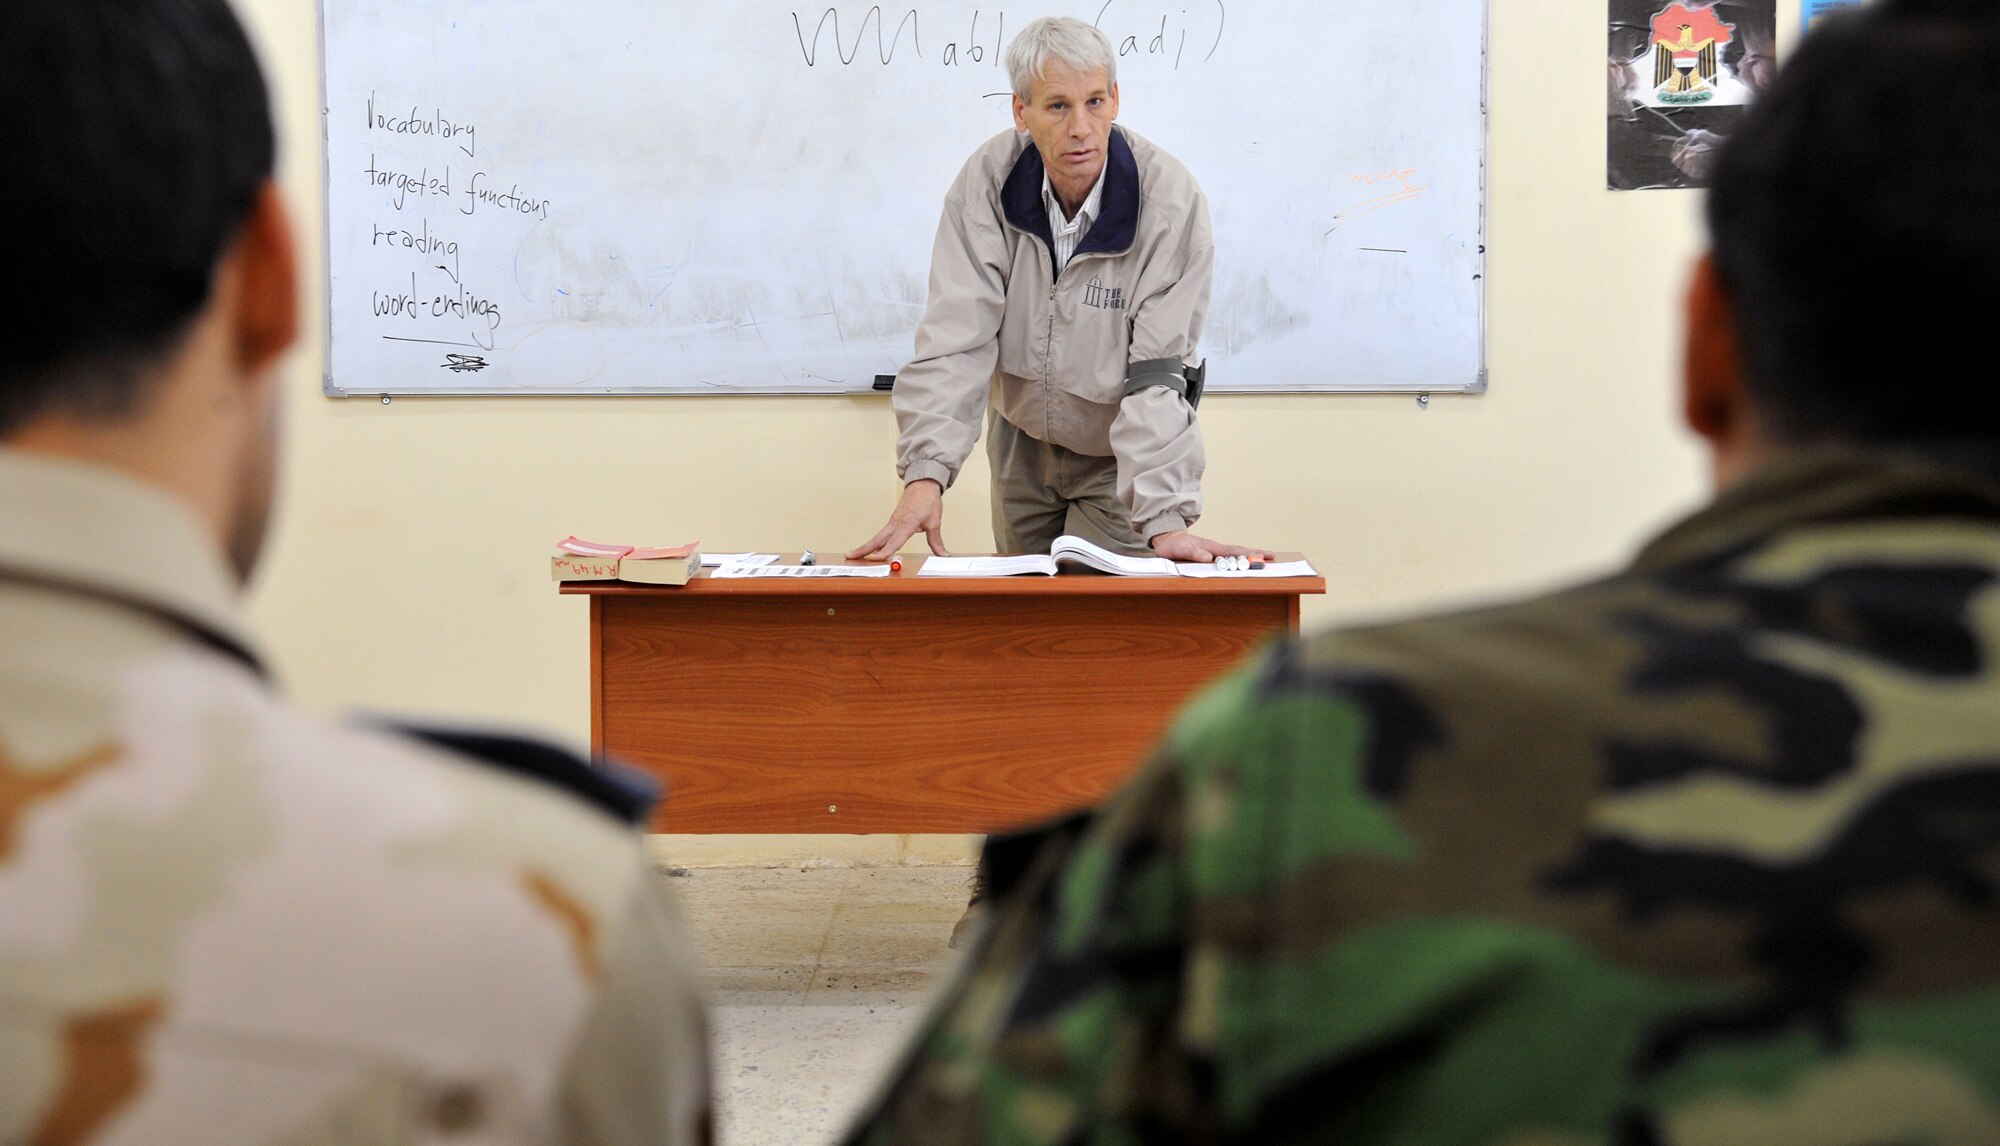 Arthur Nova teaches an advanced English language course to a class of Iraqi airmen Dec. 13, 2010, in Taji, Iraq. While air advisers work with the faculty to help them improve the way the overall program is run, it is the 19 U.S. contractors and lone Defense Language Institute civilian who work face-to-face with the students. Mr. Nova is an instructor at the Iraqi Air Force Training School. (U.S. Air Force photo/Senior Airman Andrew Lee)